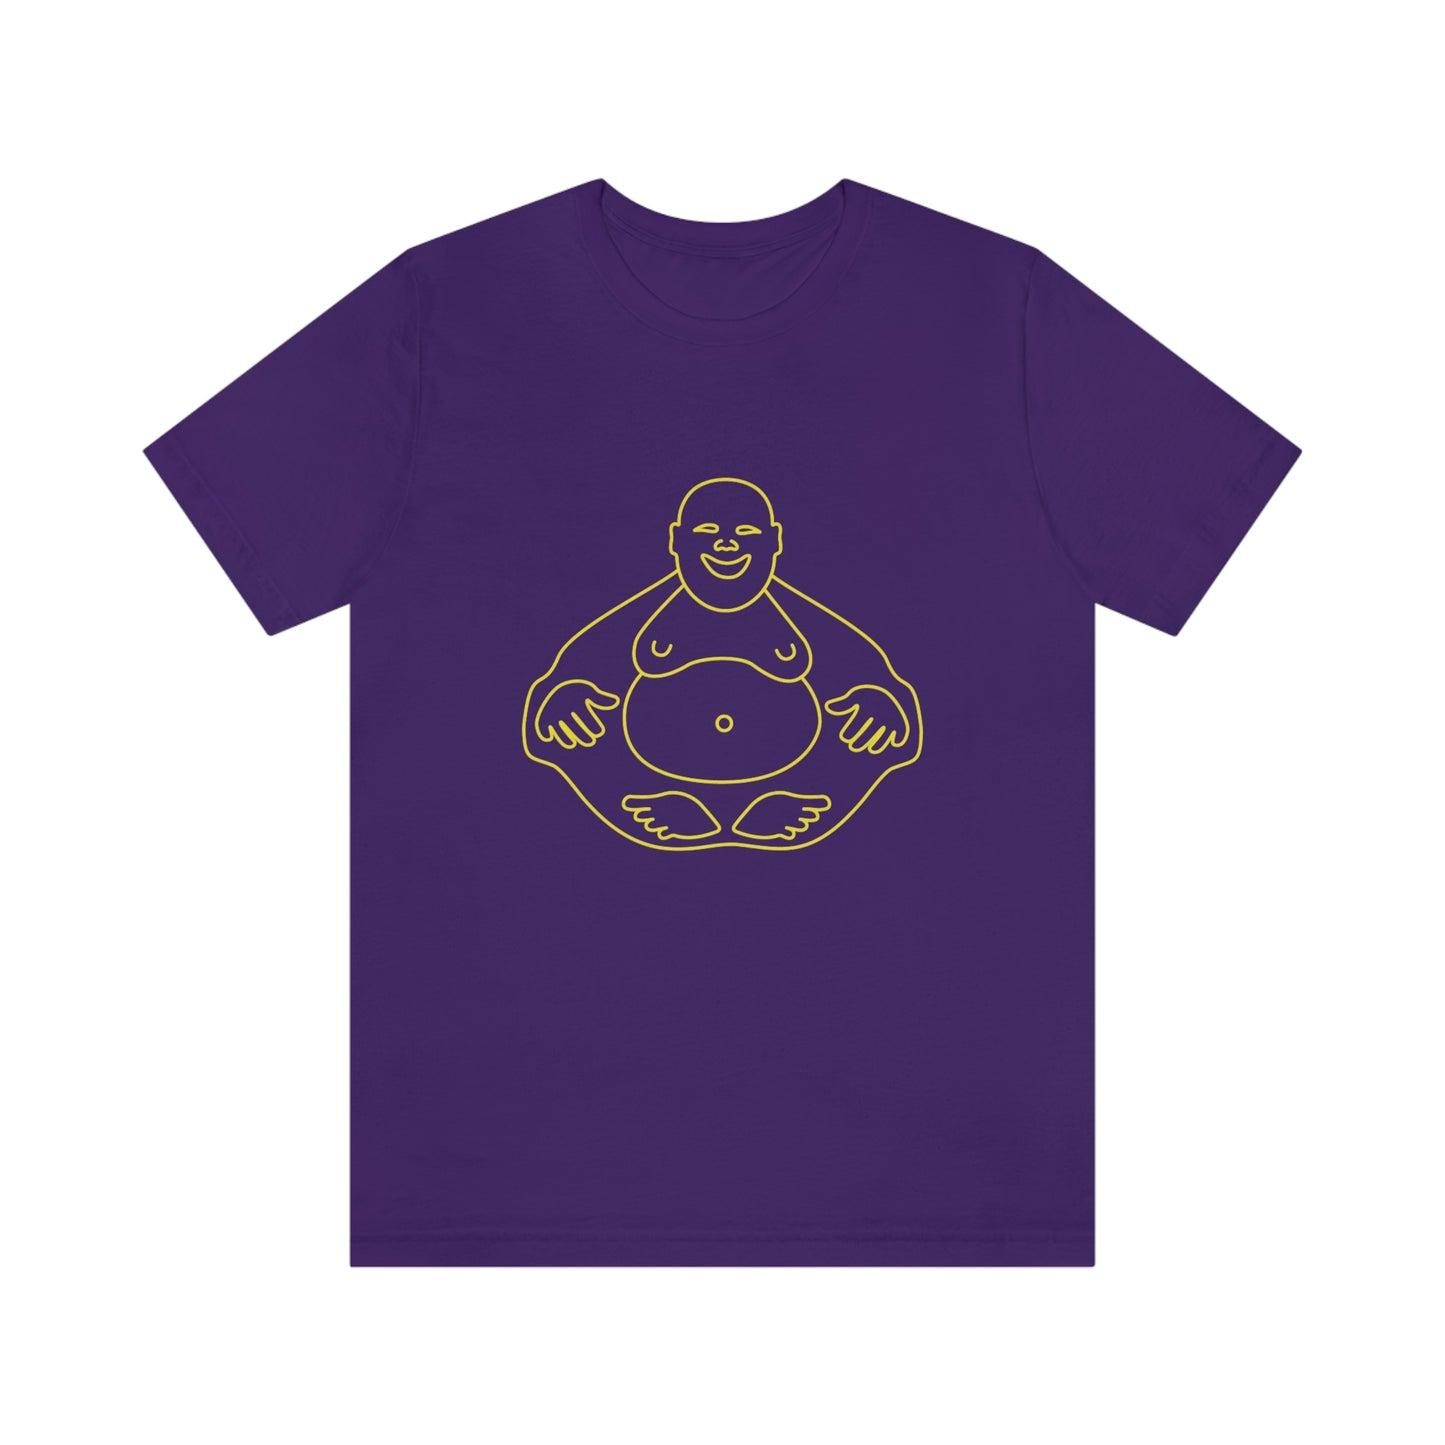 Purple T-Shirt featuring a yellow 'Laughing Buddha' design from the TEQNEON Ha Ha Land collection, exuding joy and humour